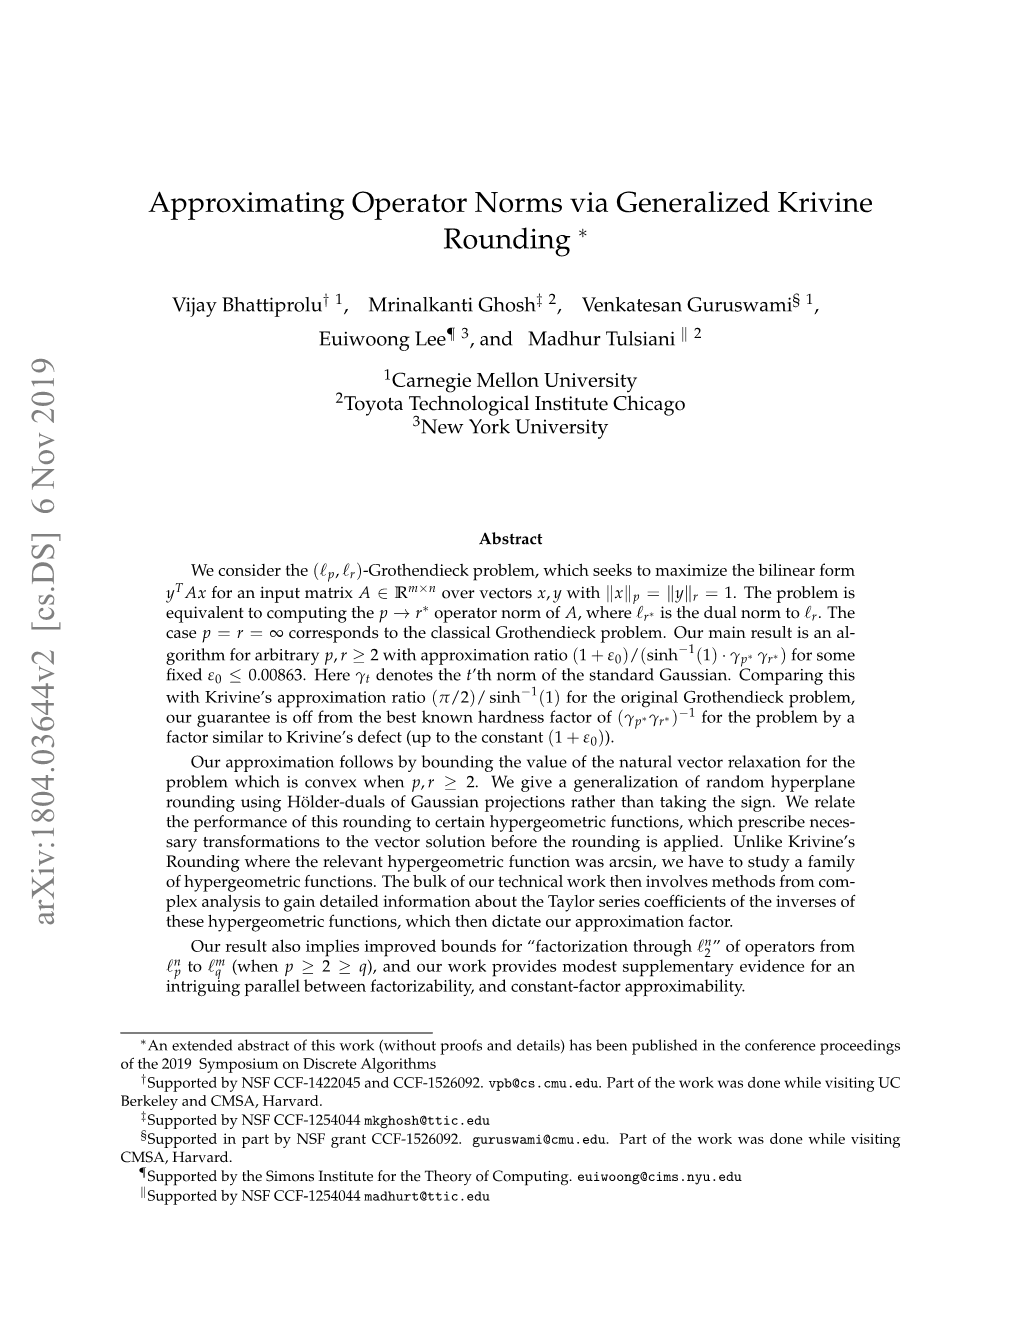 Approximating Operator Norms Via Generalized Krivine Rounding ∗